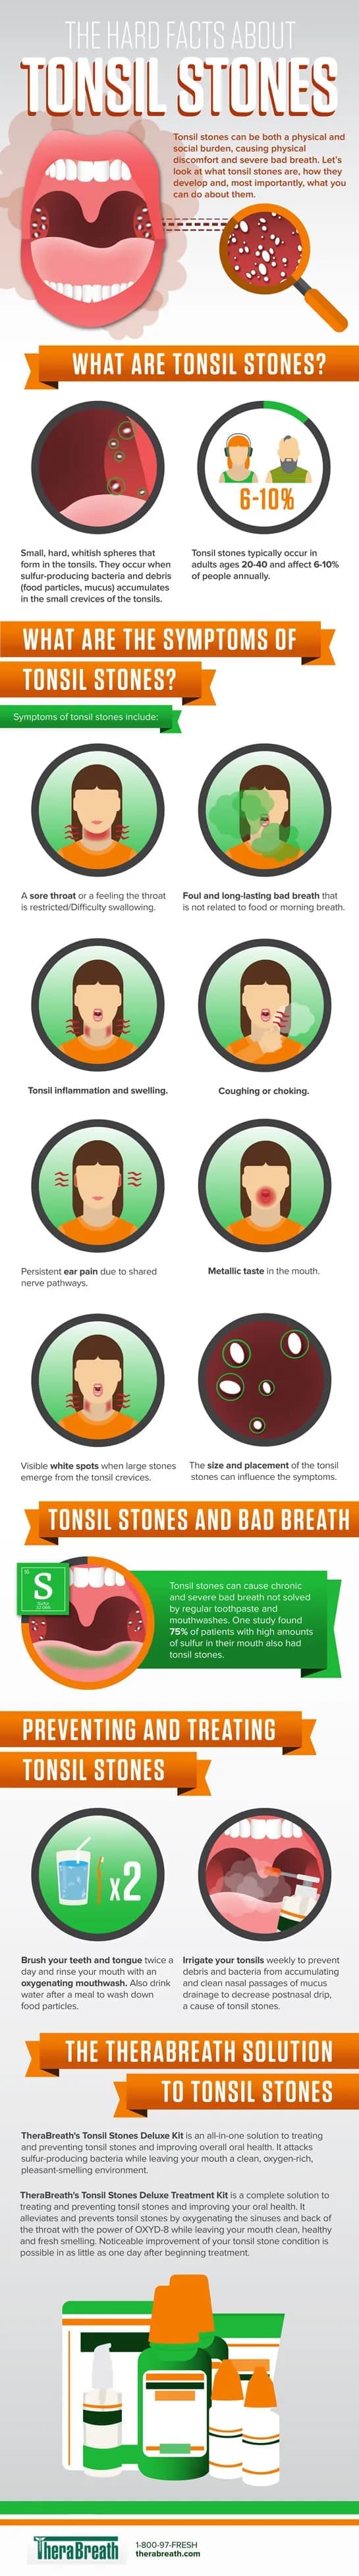 Full-size image of the The Hard Facts about Tonsil Stones infographic